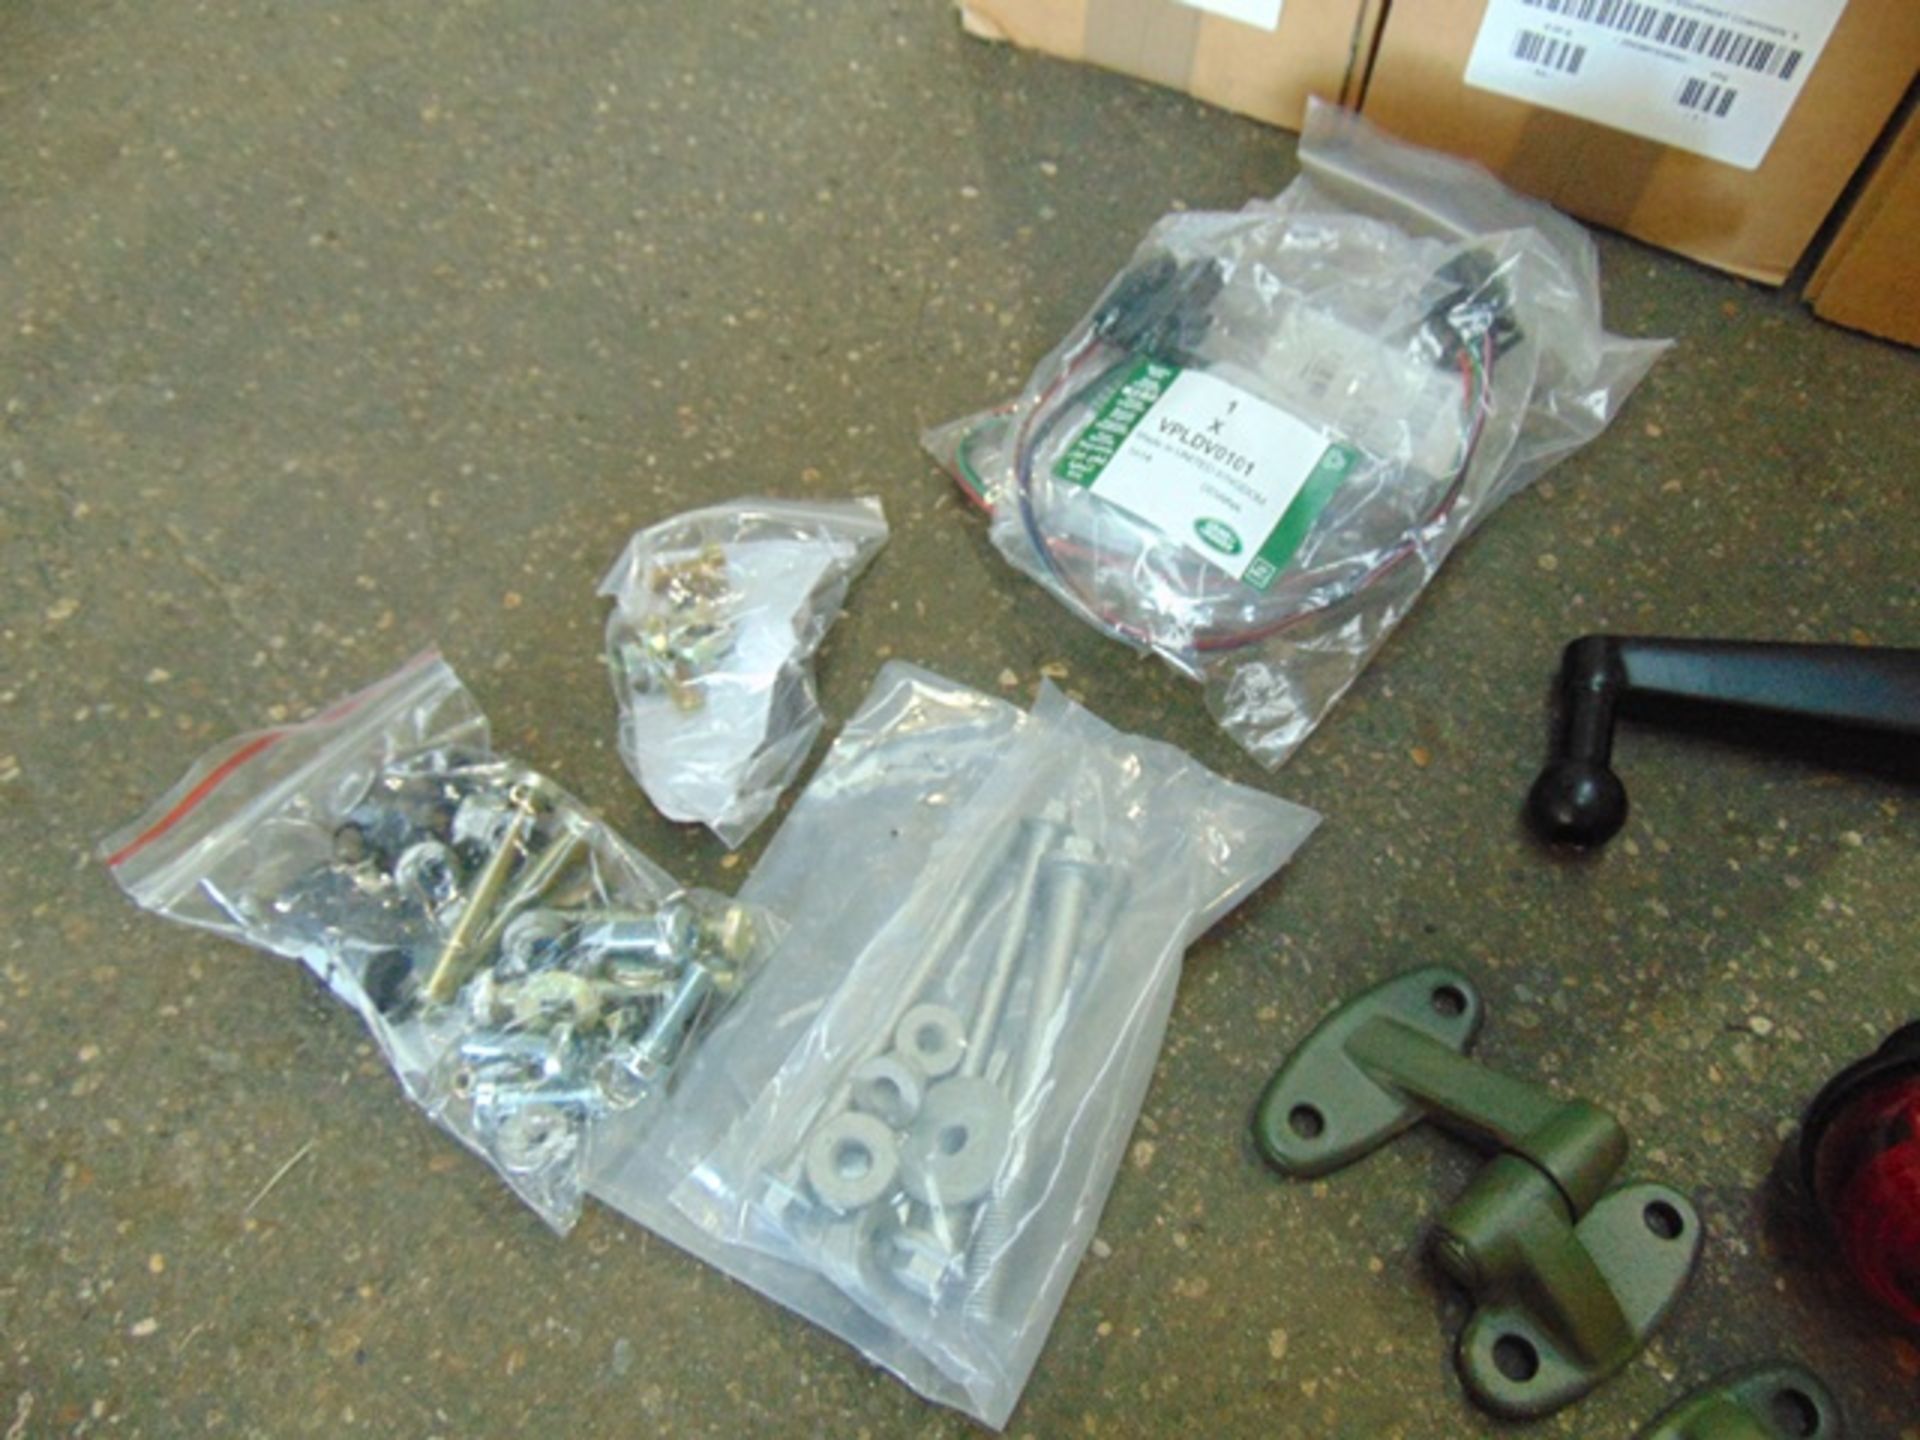 24 x Land Rover 90/110 Soft Top Modification Kits - Image 4 of 6